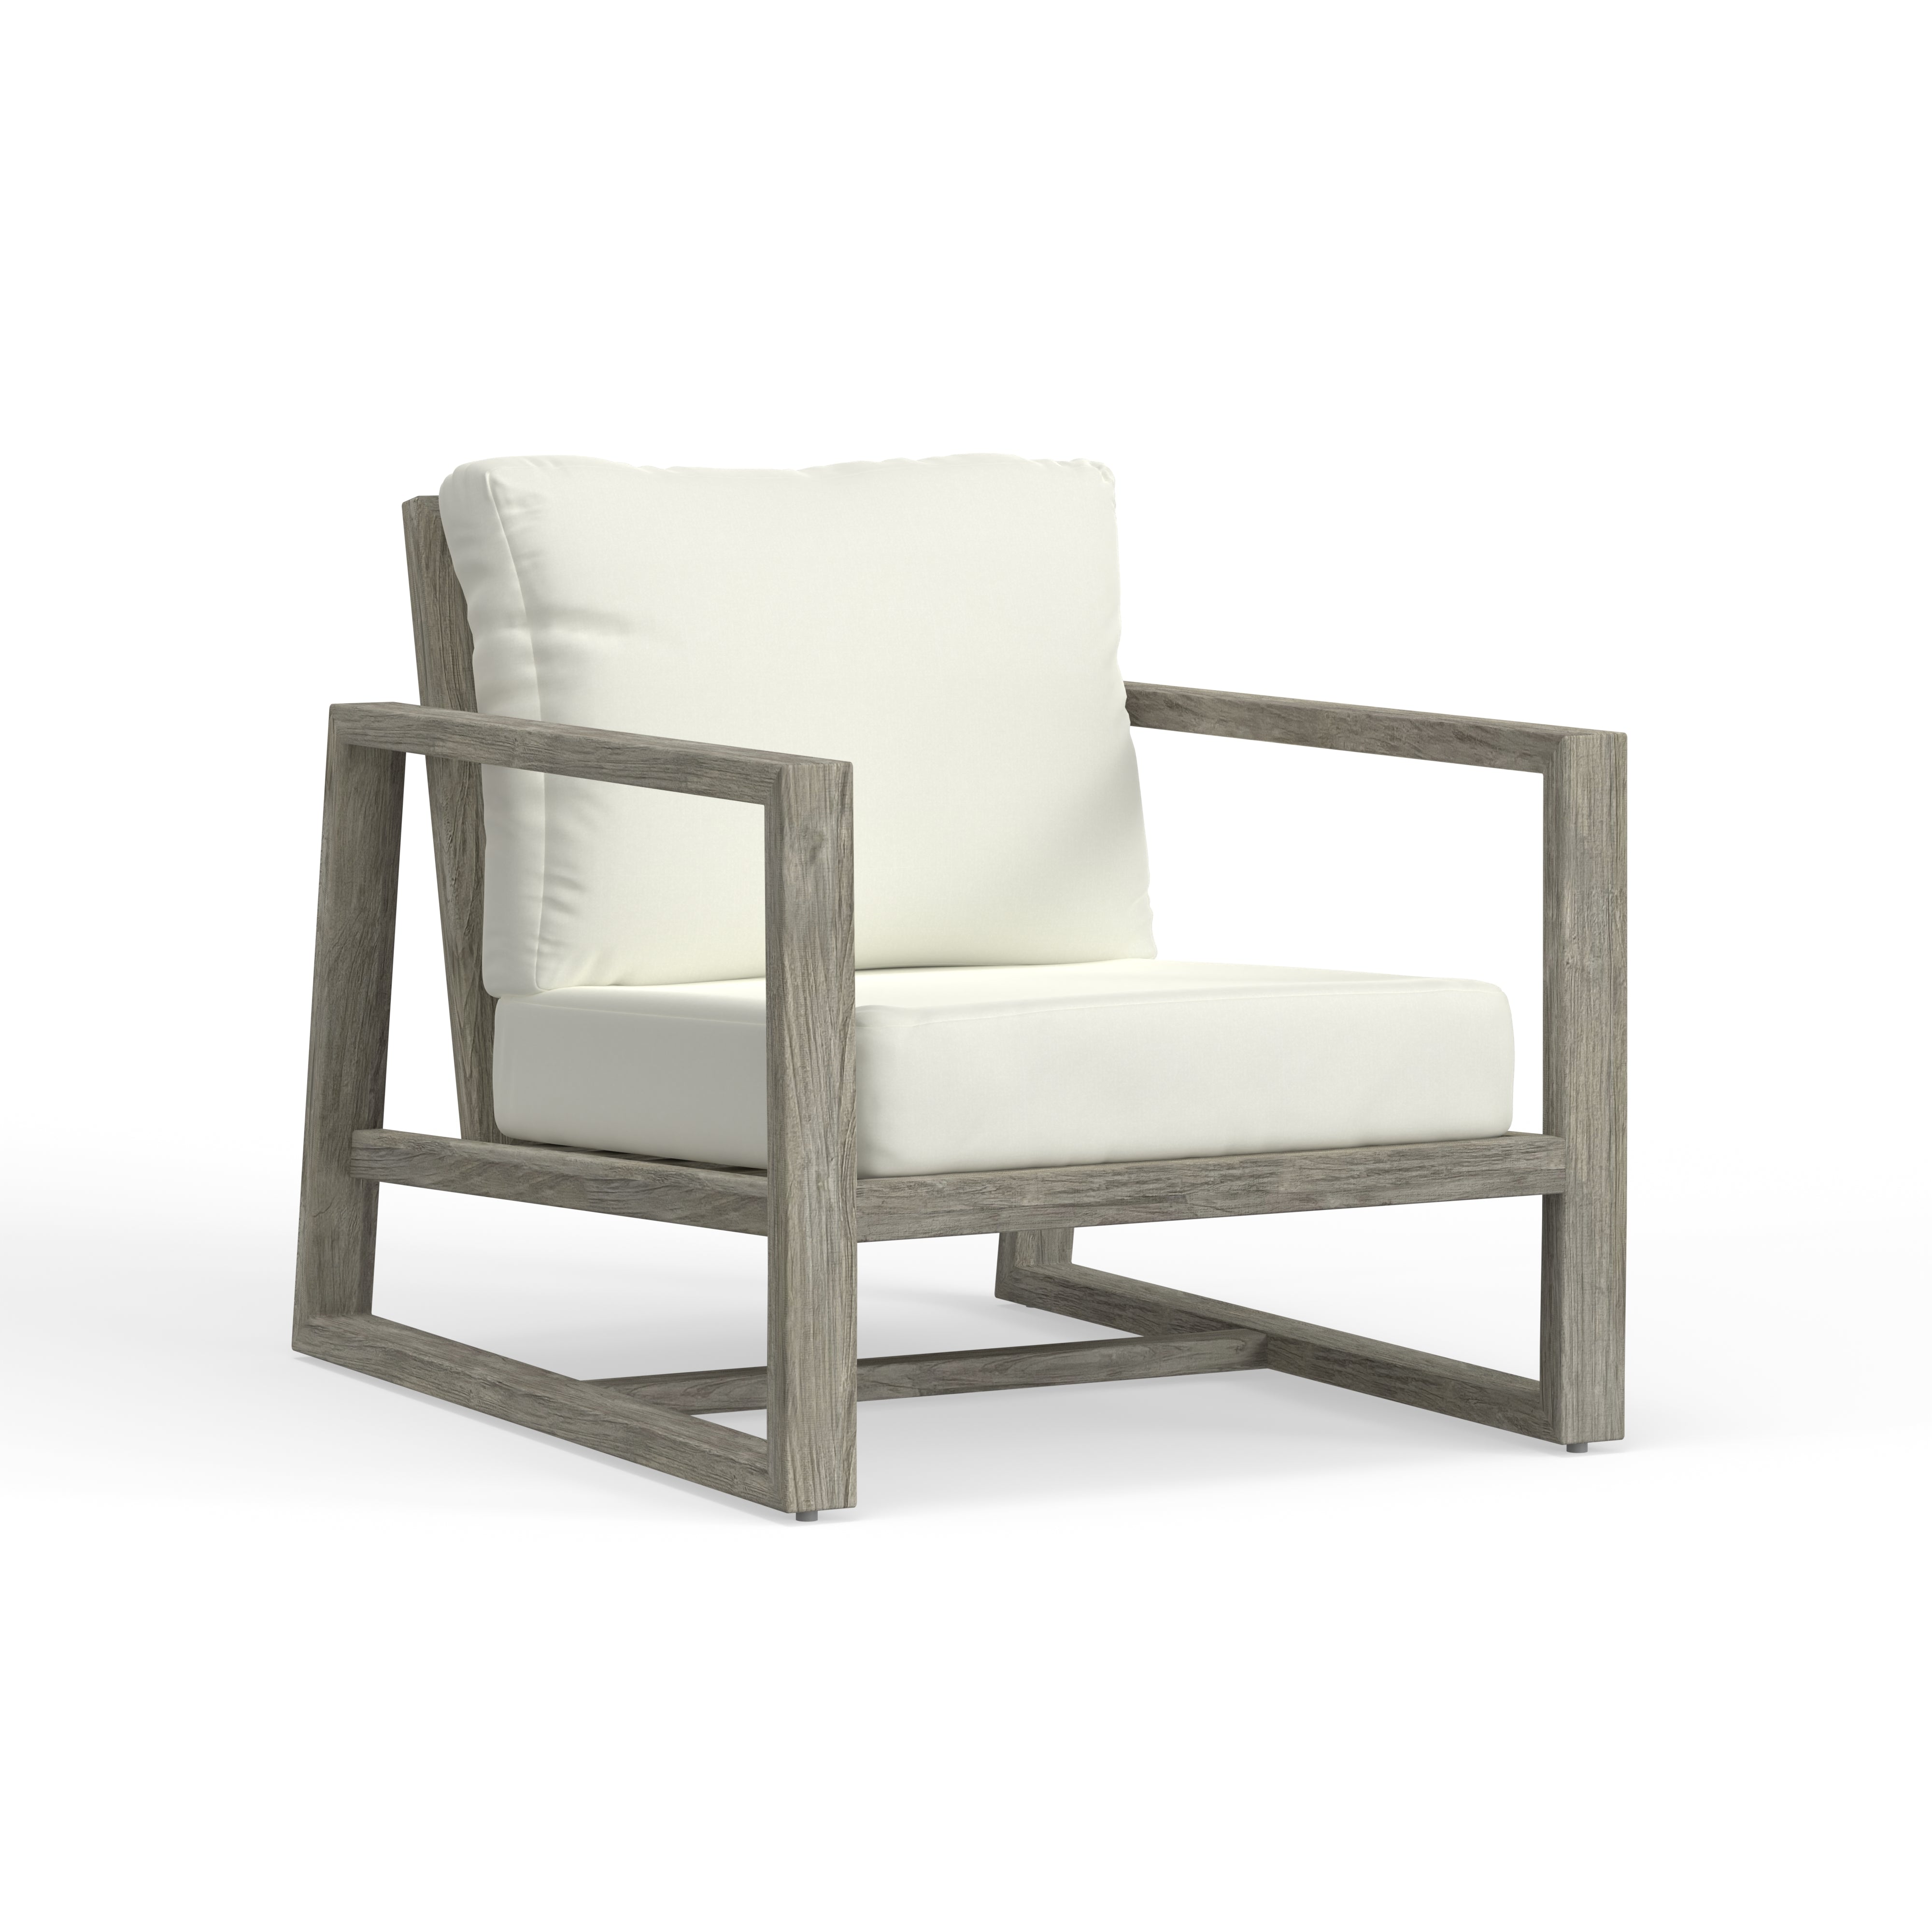 Best Quality Luxury Outdoor Club Chair Crafted In Weathered Gray Teak Wood And Sunbrella Cushions Included